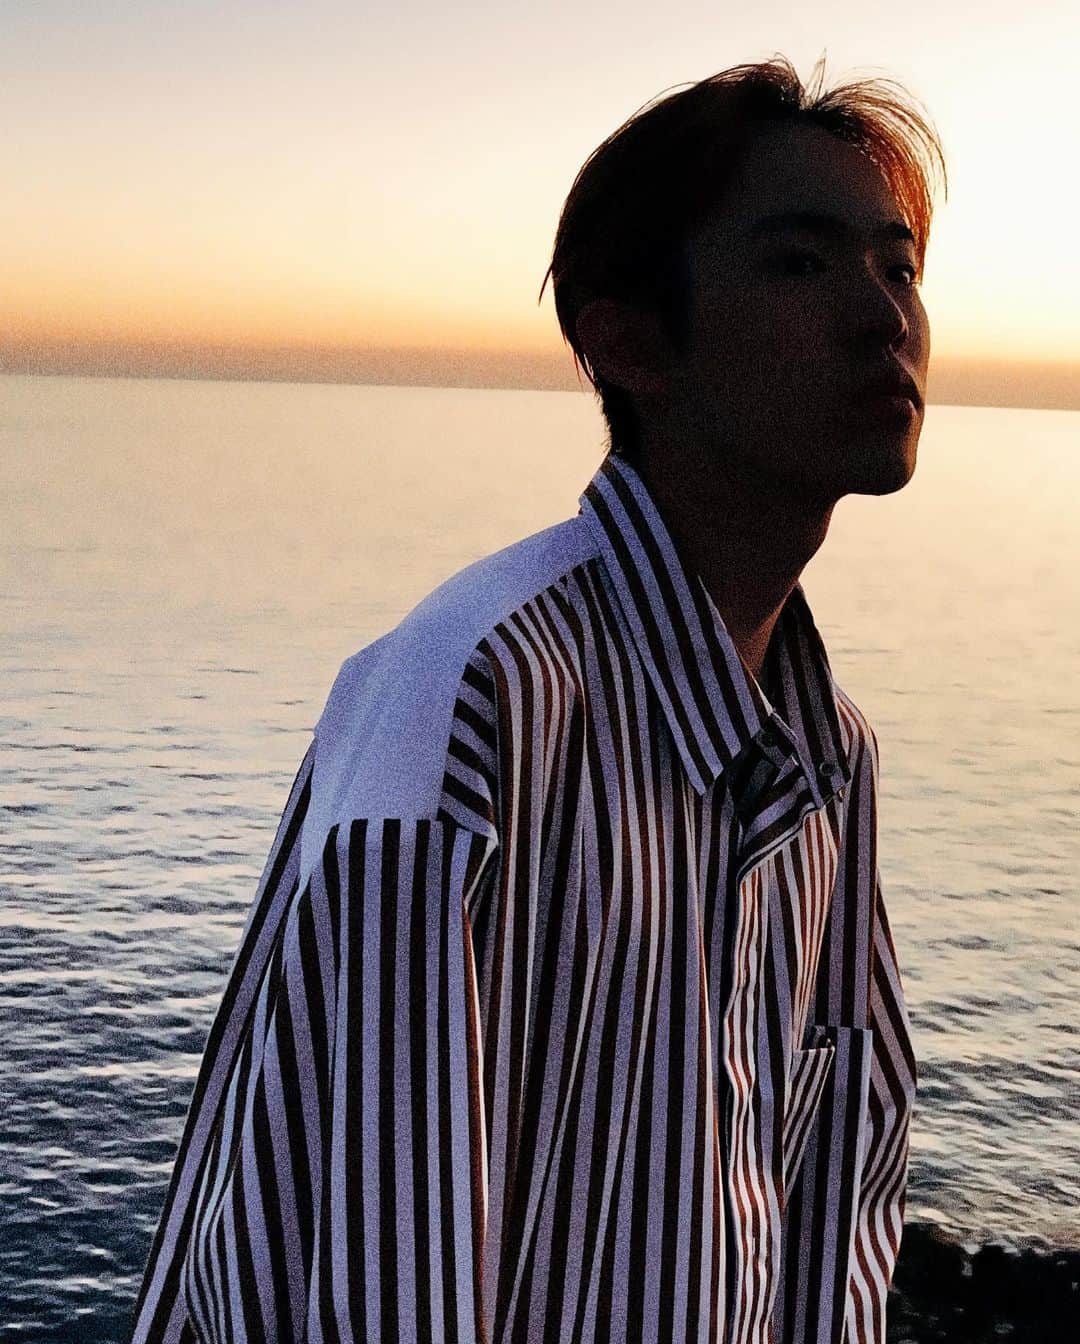 ミノトールさんのインスタグラム写真 - (ミノトールInstagram)「MINOTAUR INST. TECH STRIPE SHIRTS  FUNCTION : ANTIBACTERIAL COOL TOUCH DEODORIZATION HEAT SHIELD EFFECT PREVENTION OF SHEER UV GUARD WRINKLE PREVENTION  風合いと機能の組み合わせをビジュアル化したファンクショナル リラックスシルエットシャツ。 ベースになっているストライプ生地は、GIZA94 というエジプト綿の中でも繊維長が長い希少な素材と機能繊維からなるハイクオリティーファブリックであり、接触冷感・着用時の防シワとイージーケア仕様。 発汗性の高い脇下と背面には、消臭 / 抗菌 / 防臭 /UV/ 吸湿発熱・放湿冷却/制電加工された素材を使用。  A functional relaxed silhouette shirt that visualizes the combination of texture and function. The base striped fabric is GIZA94, a high-quality fabric made of functional fibers and GIZA94, which is a rare material with long fiber length among Egyptian cotton. Deodorant / antibacterial / deodorant / UV / moisture absorption heat generation / moisture release cooling / antistatic processed materials are used on the underarms and back, which are highly sweaty.  Production : Made in Japan Material : Made in Japan  #minotaur_inst #minotaurinst #minotaur #ミノトールインスト #ミノトール #functional #comfortable #miyashitapark #tech #techwear #テック #relaxsmart #リラックススマート #relaxsmartwear #リラックススマートウェア #shirts #techshirts #stripeshirts #シャツ #ストライプシャツ #unisex #ユニセックス」6月4日 19時06分 - minotaur_inst._official